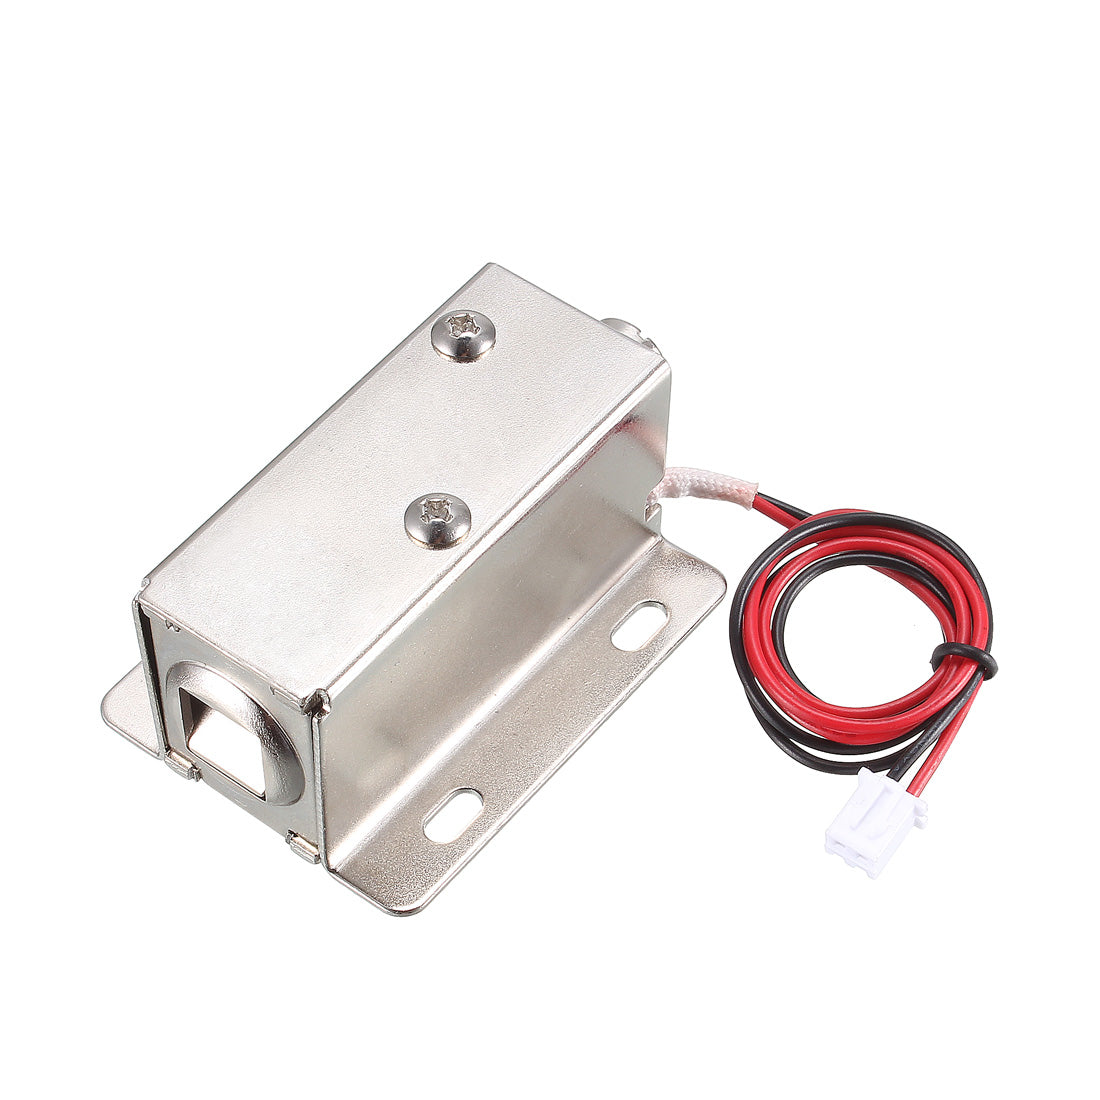 uxcell Uxcell DC 12V 0.3A 8.5mm Electromagnetic Solenoid Lock Assembly for Electirc Lock Cabinet Door Lock